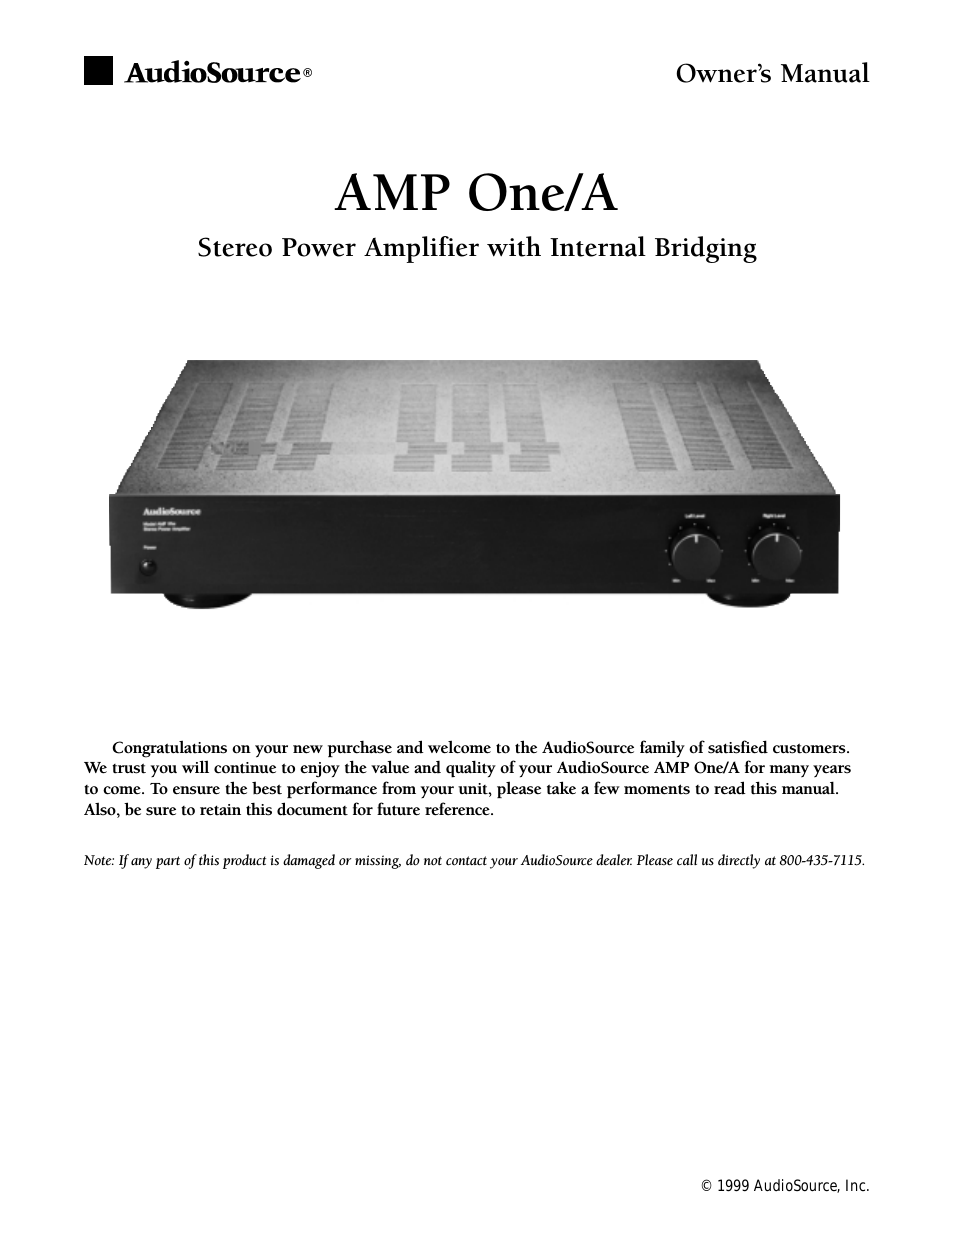 AMP One/A